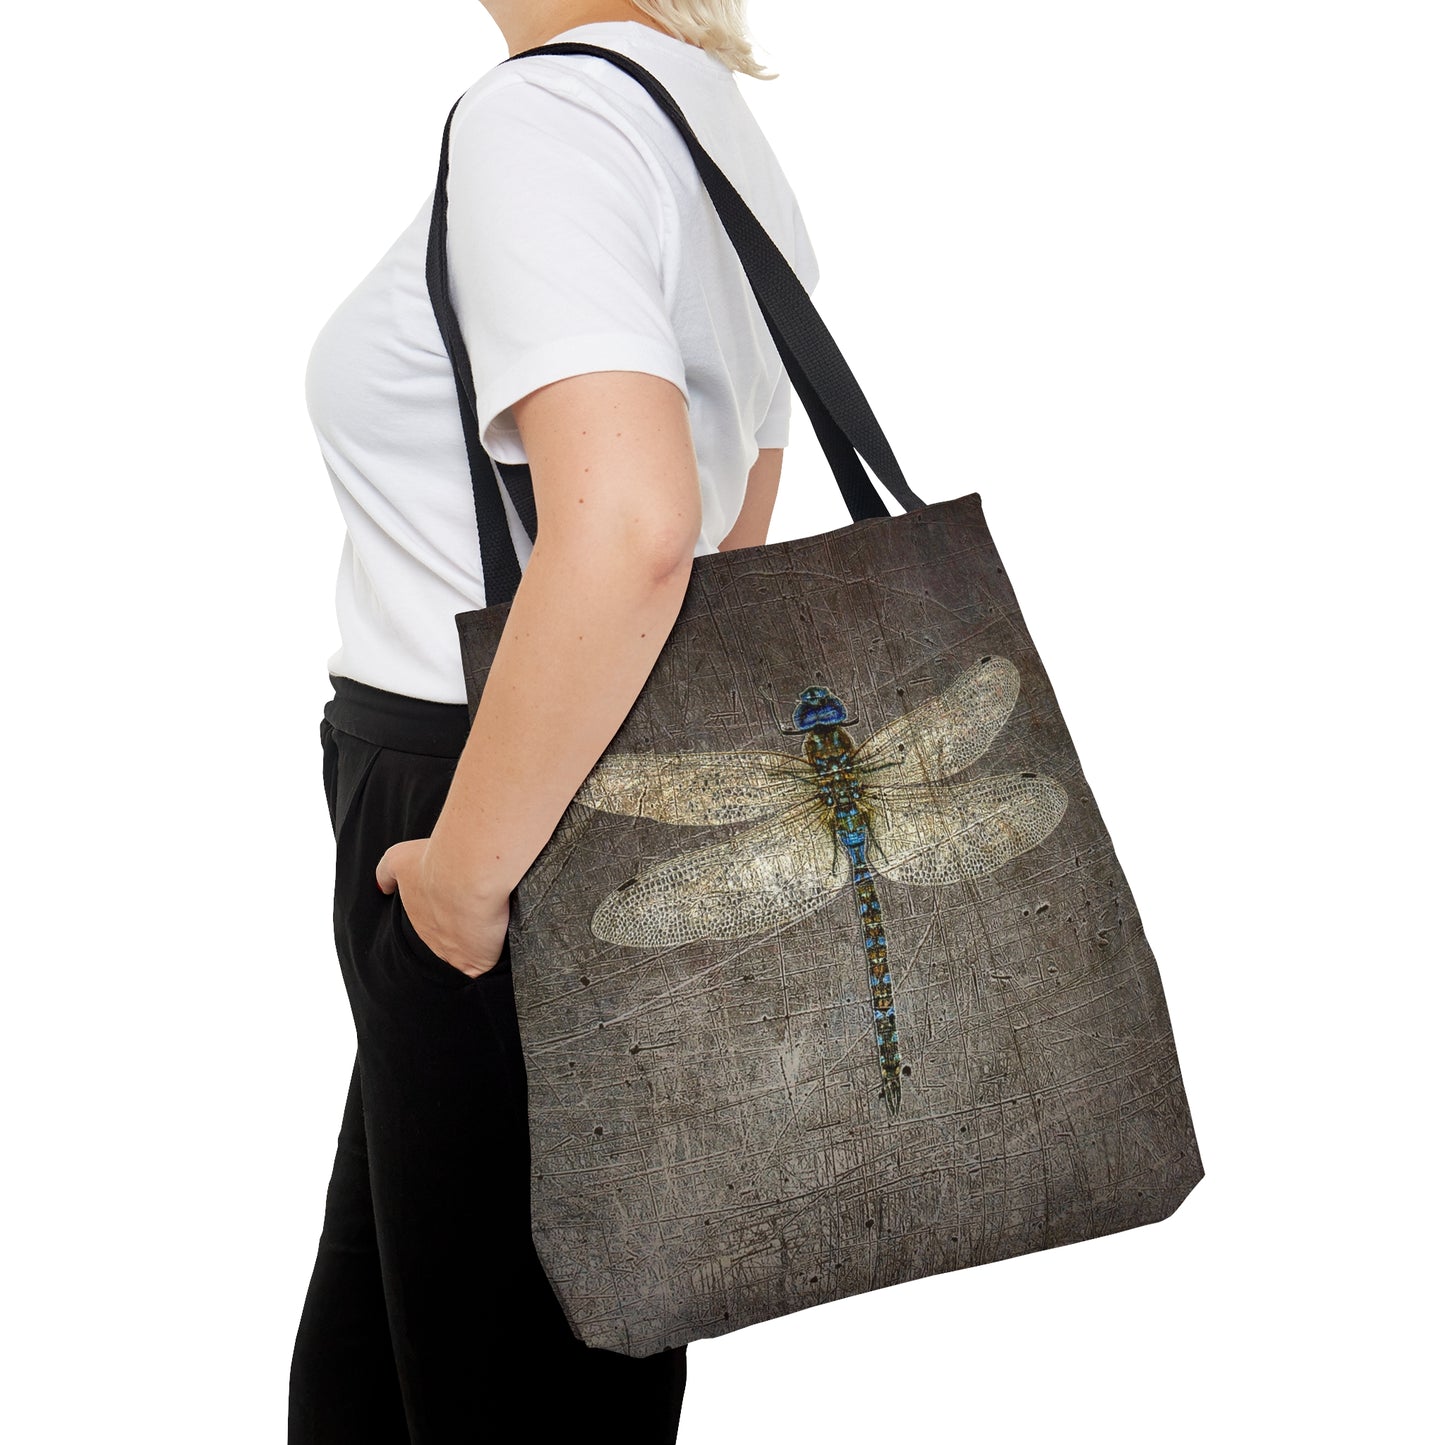 Dragonfly Themed Bags and Accessories - Dragonfly on Distressed Gray Stone Printed on Tote Bag